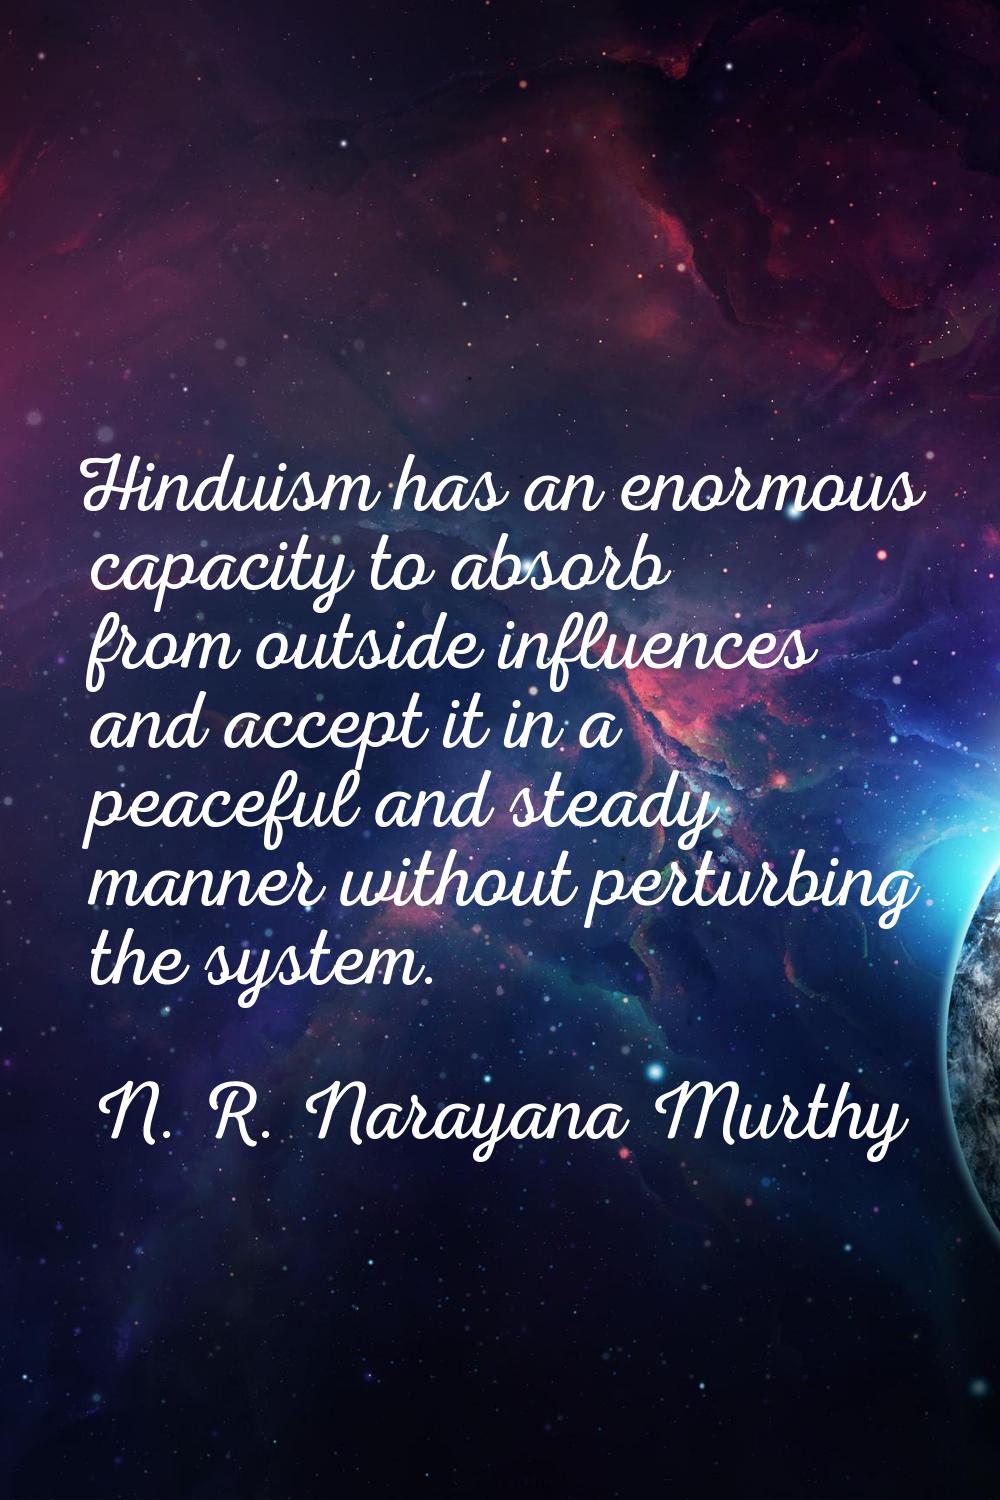 Hinduism has an enormous capacity to absorb from outside influences and accept it in a peaceful and